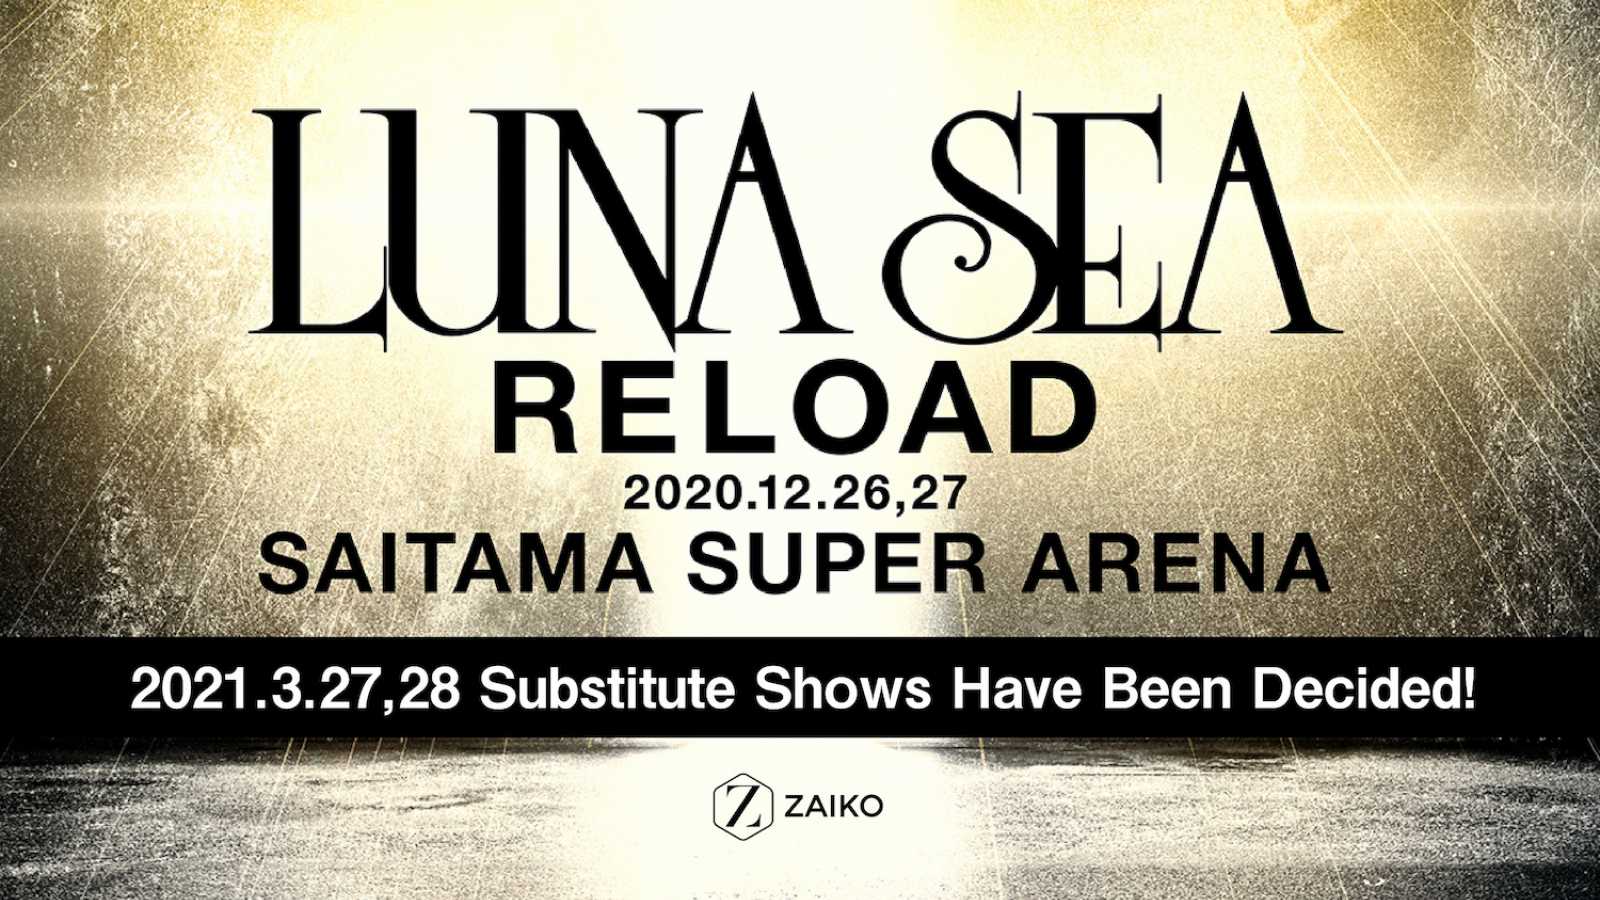 Substitute Dates Announced for "LUNA SEA -RELOAD-" Shows © LUNA SEA. All rights reserved.